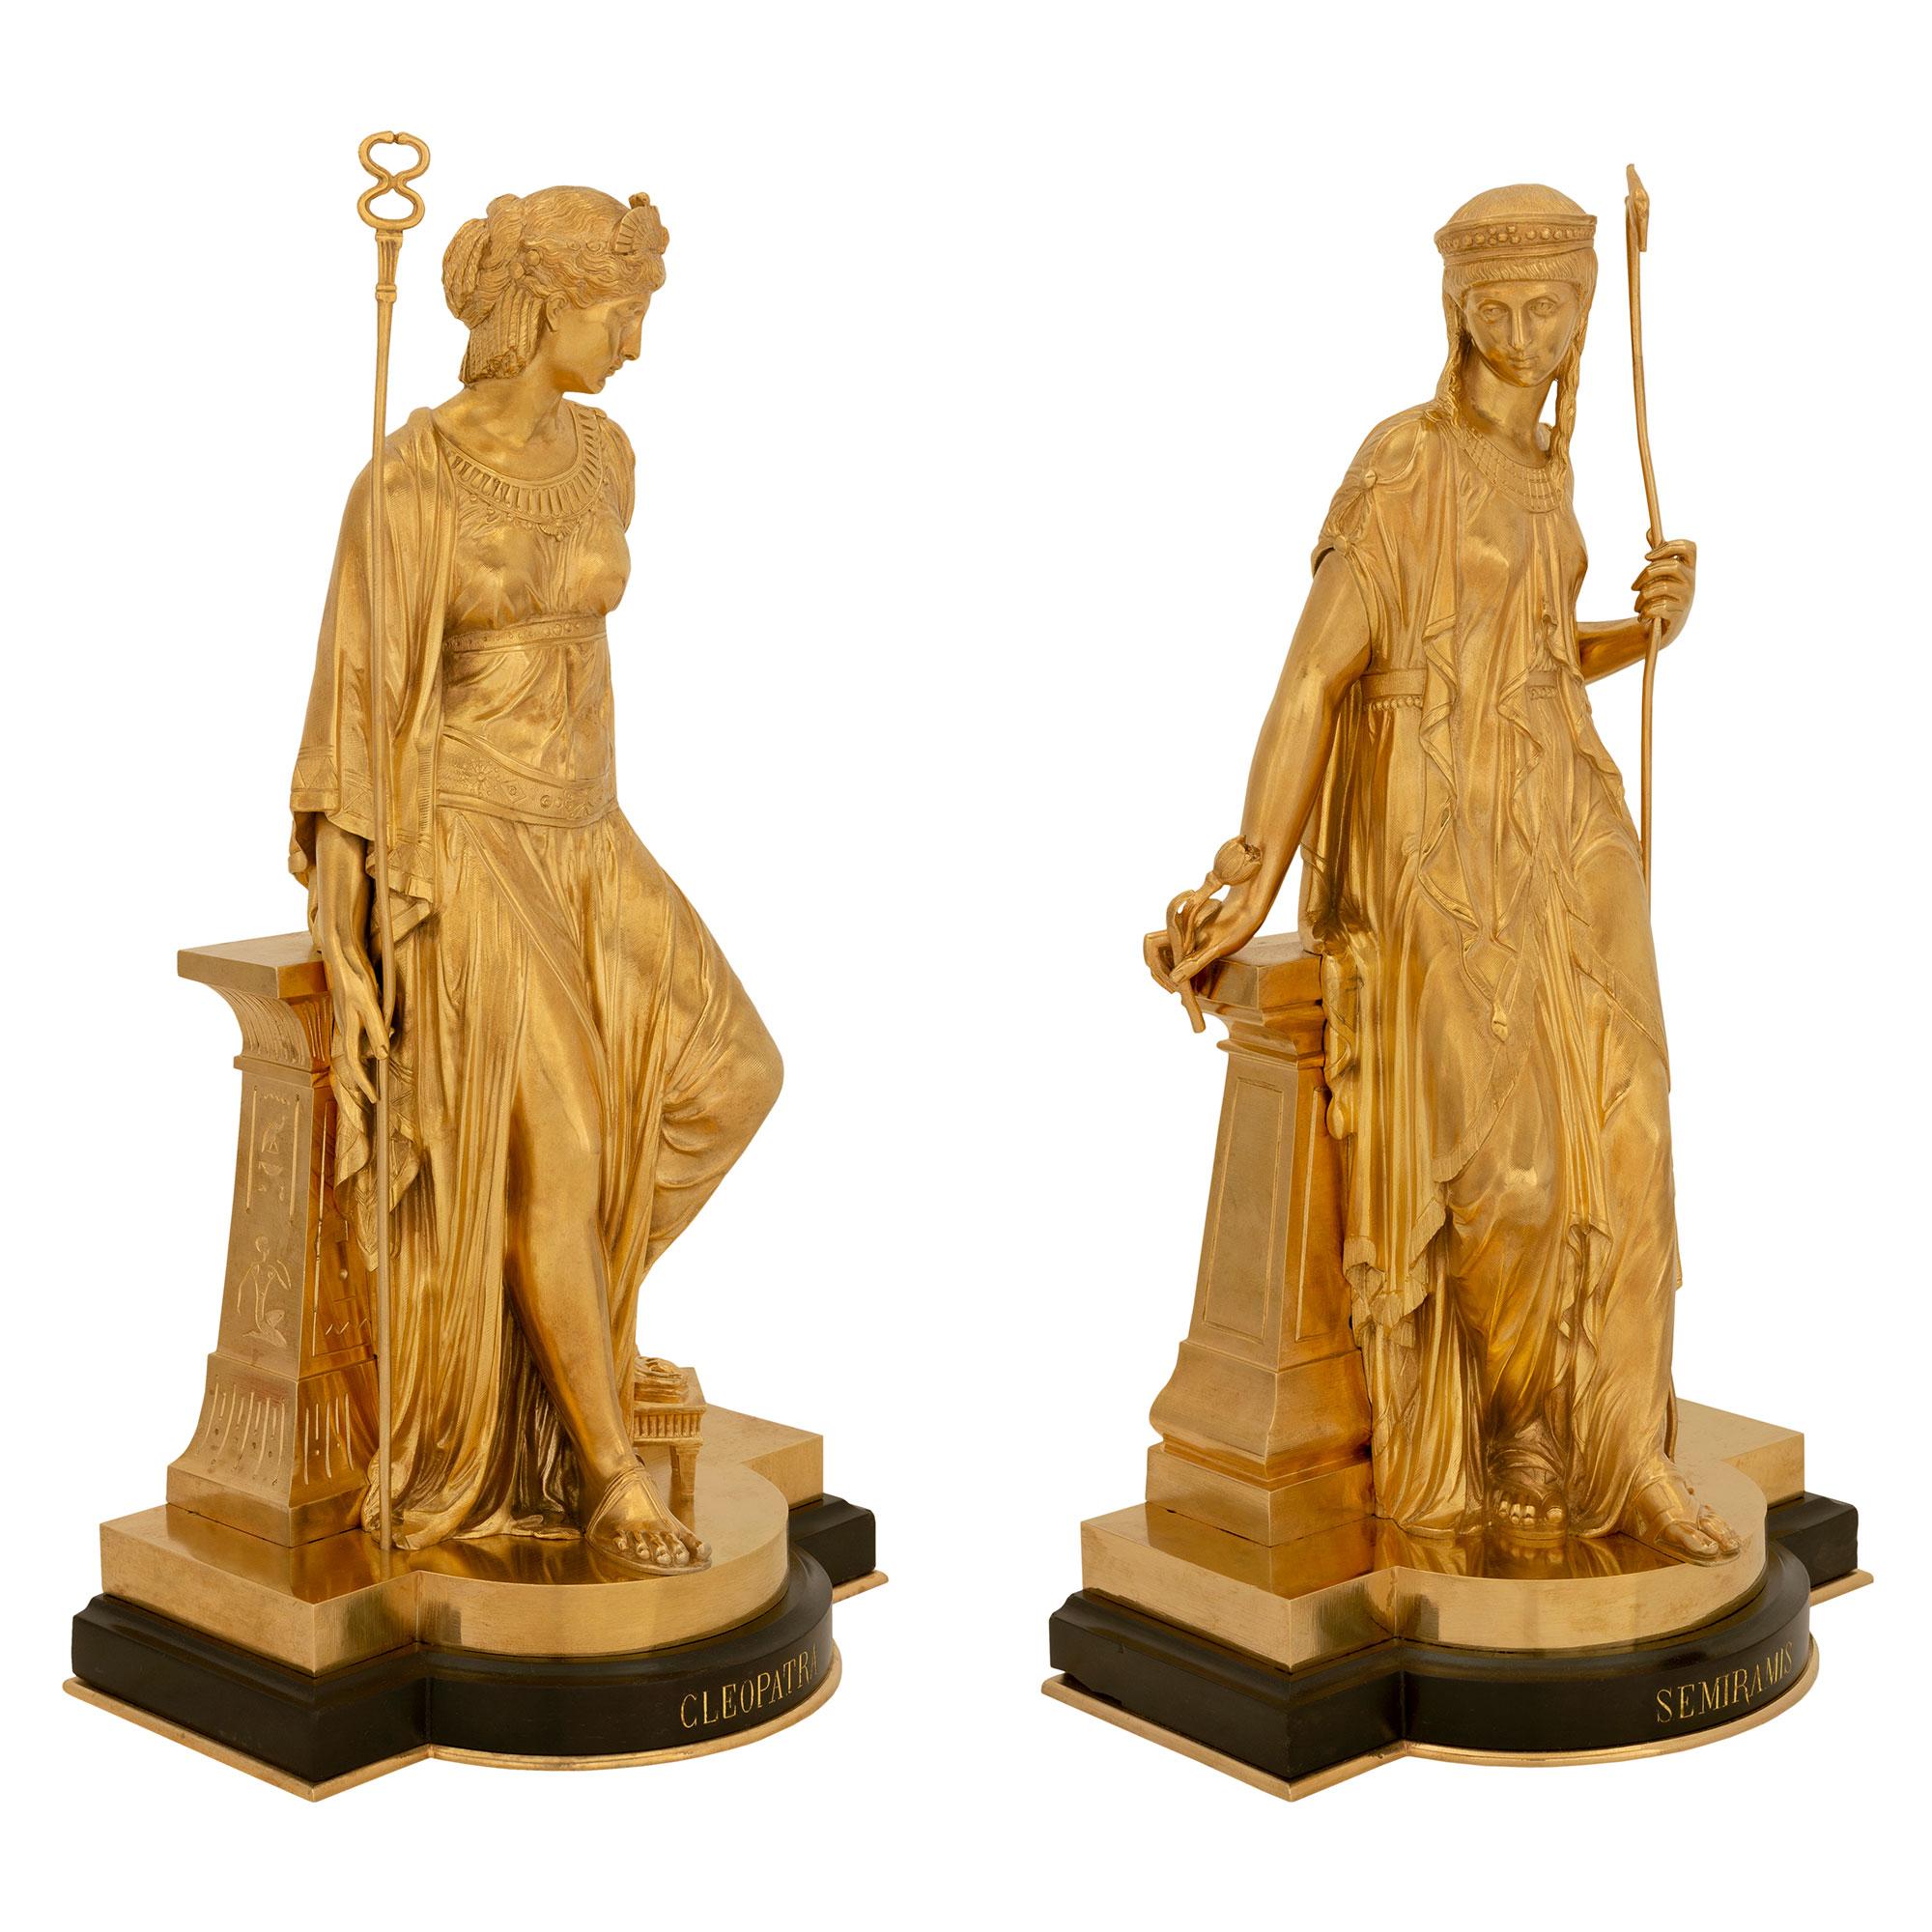 A striking true pair of French 19th century Neo-Classical st. black Belgian marble and ormolu statues of Cleopatra and Semiramis, signed Bouret 1874. Each statue is raised by an elegant black Belgian marble base with a fine bottom ormolu fillet and